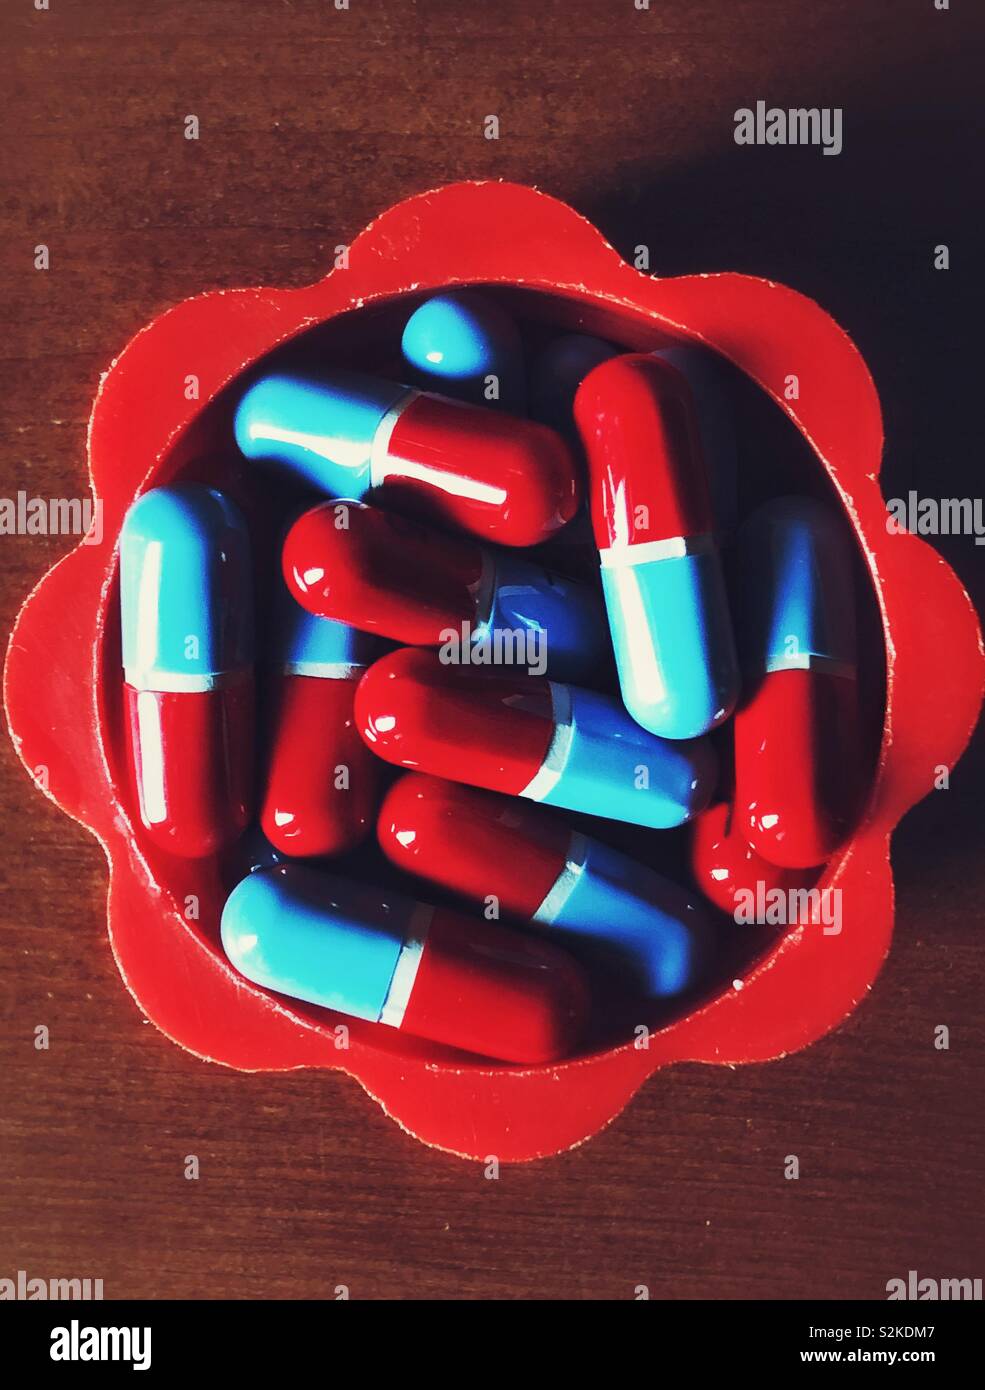 Download Red And Blue Pills In A Red Plastic Container Stock Photo Alamy Yellowimages Mockups